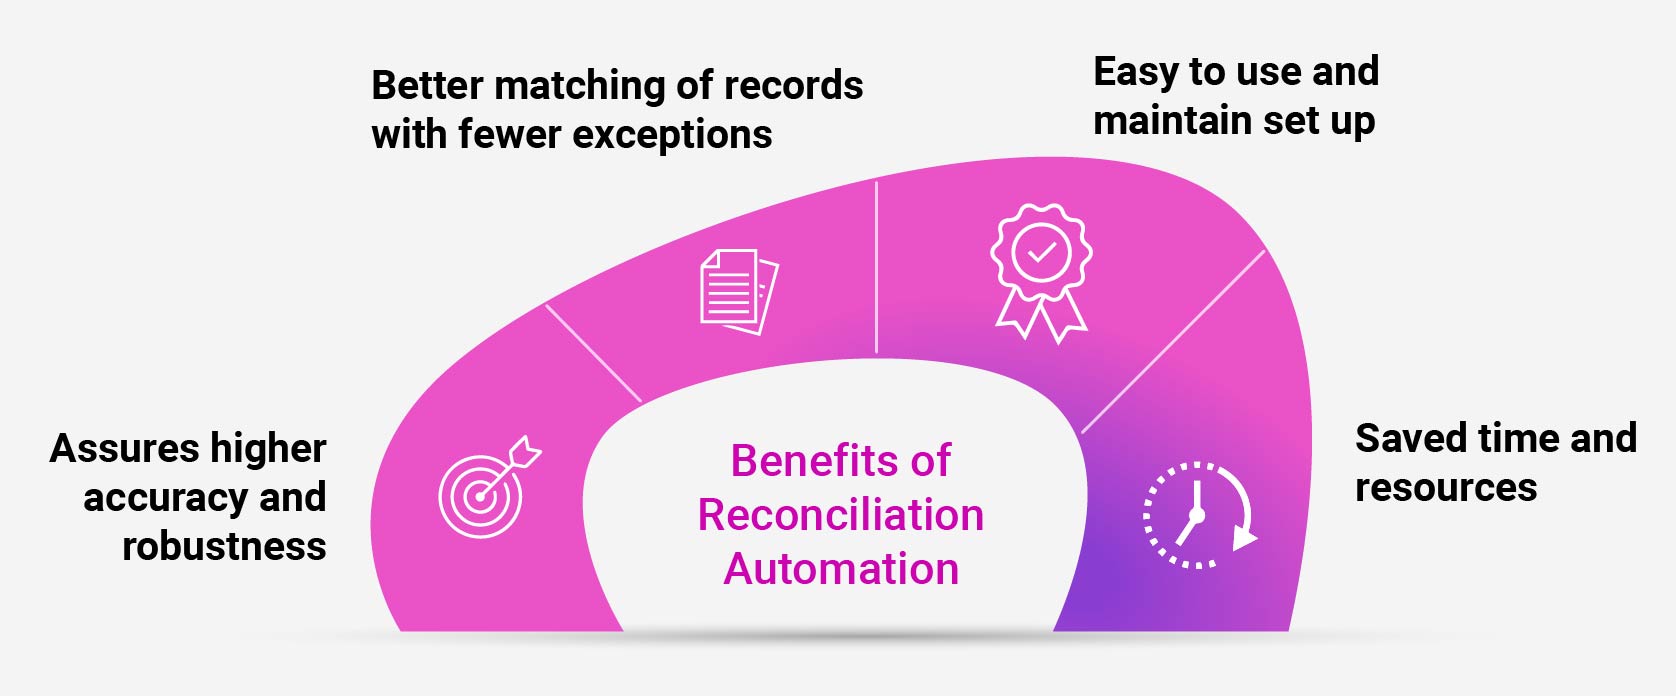 Benefits of Reconciliation Automation